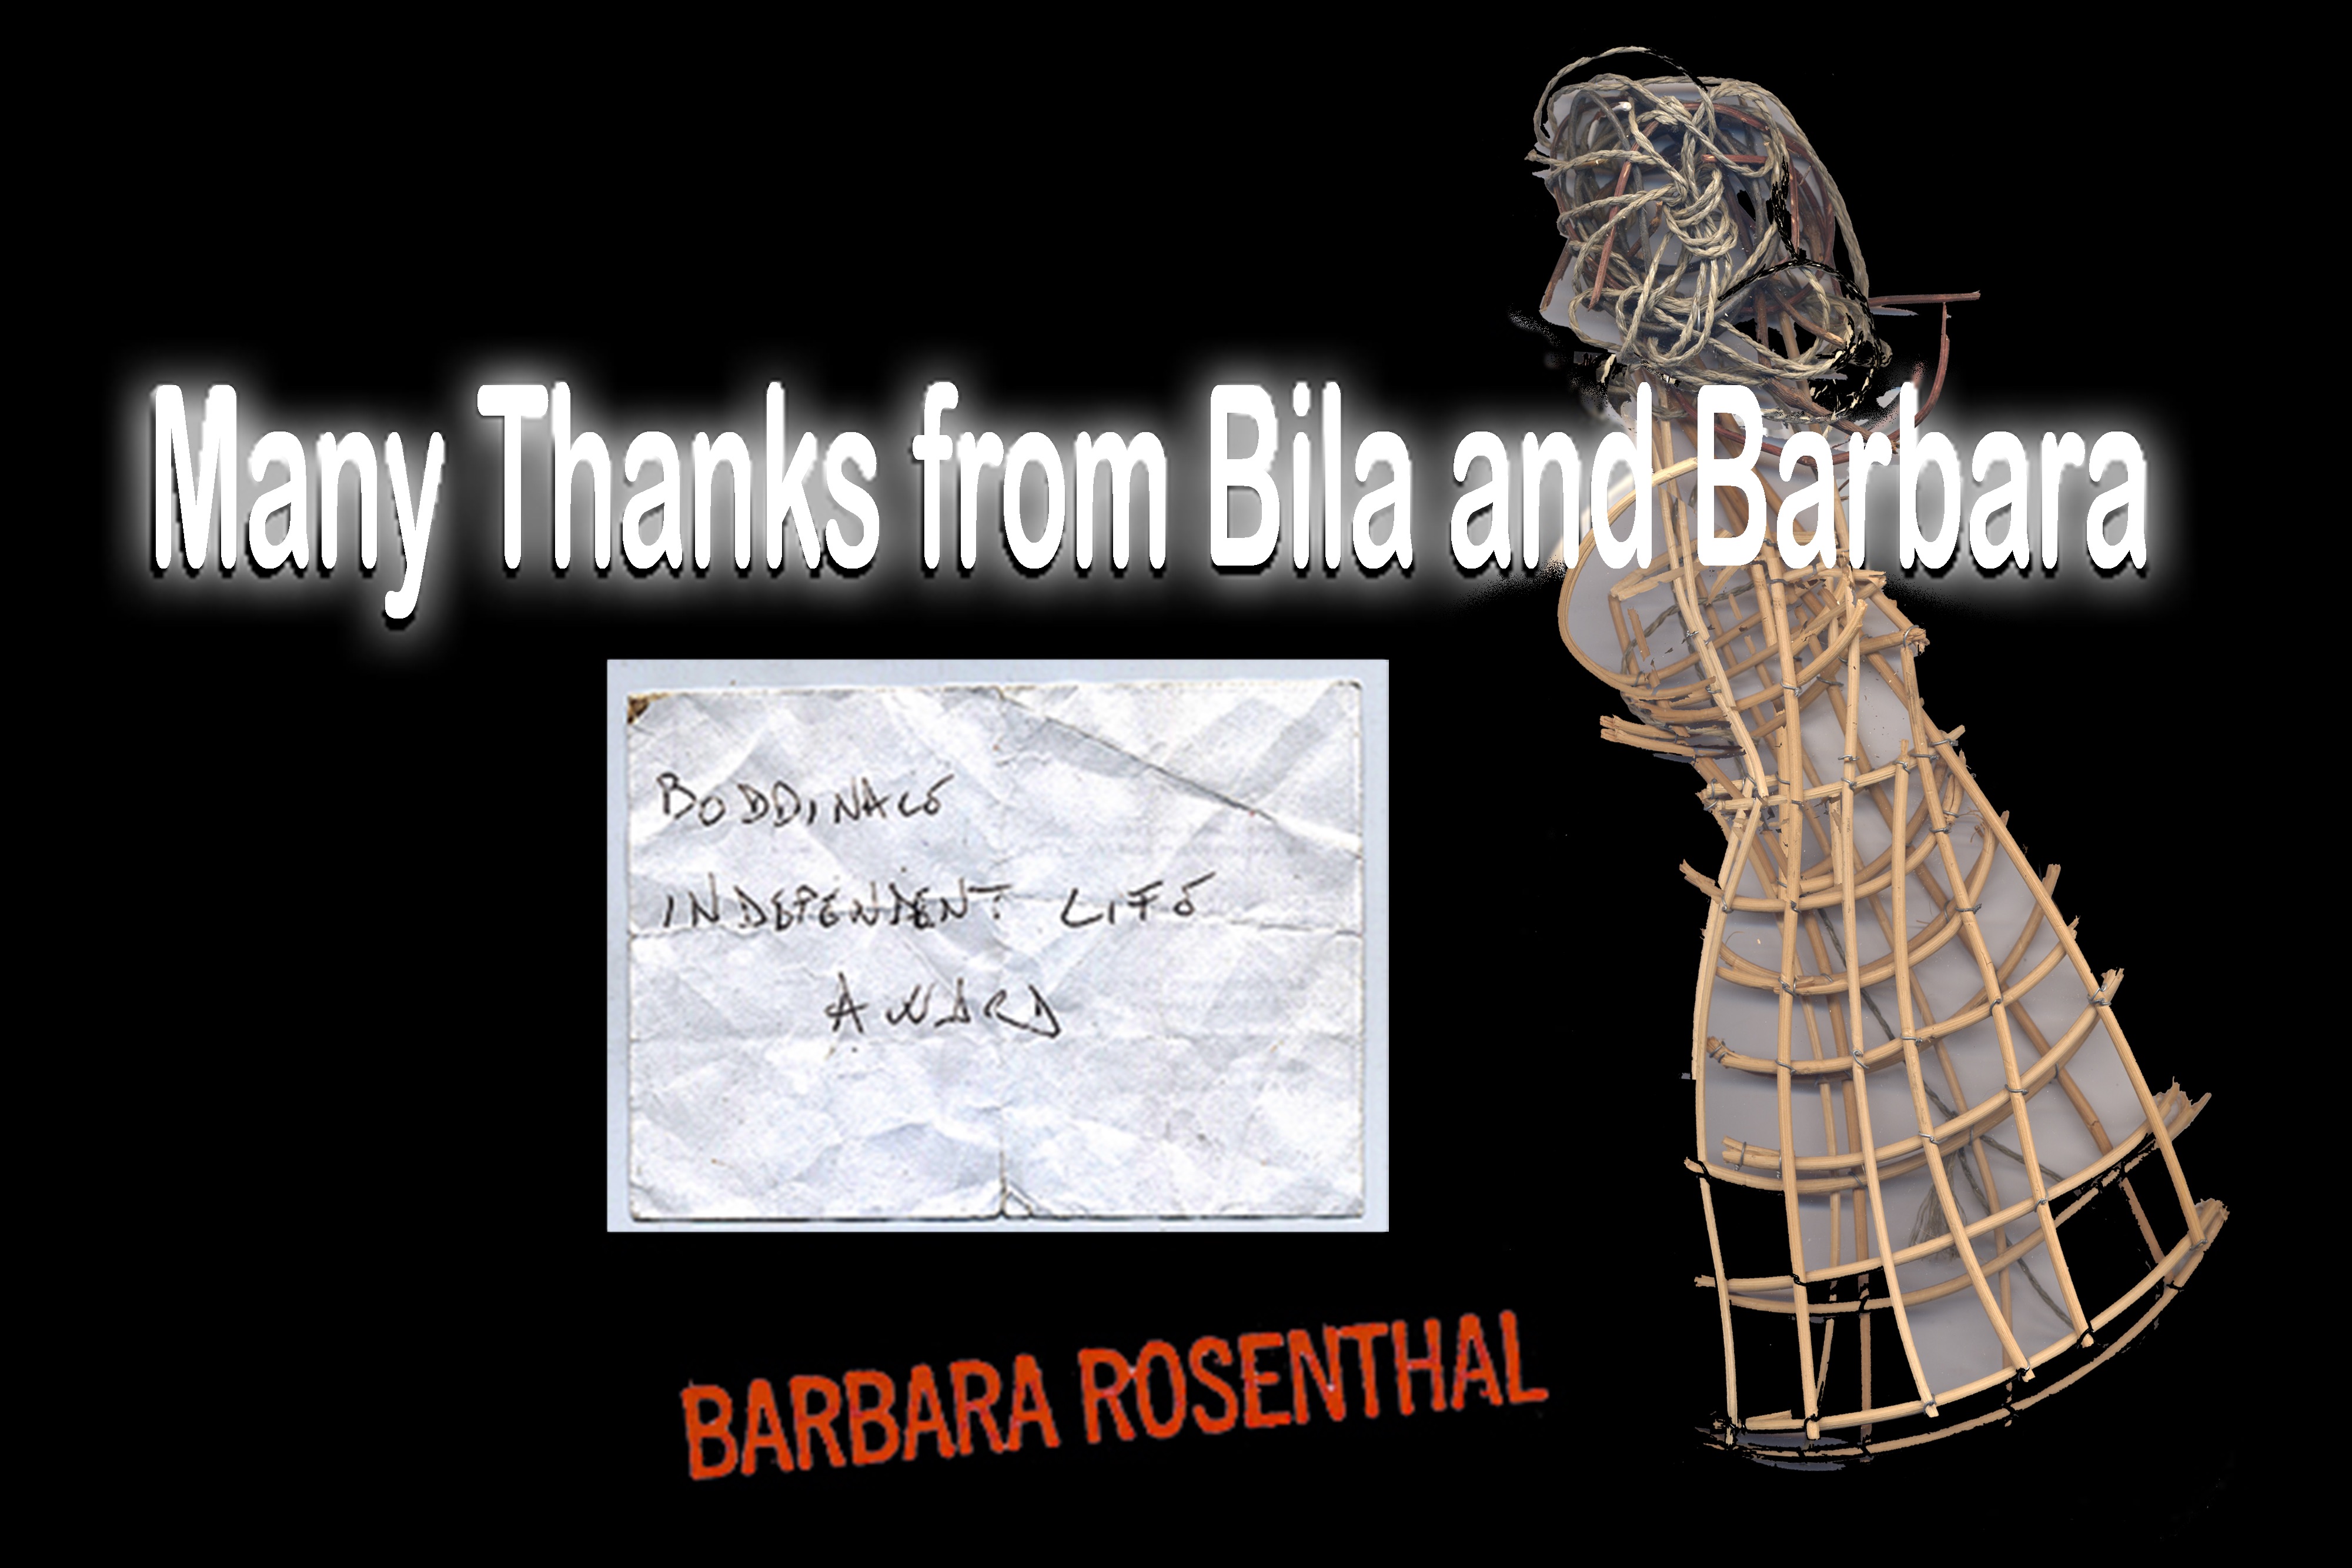 Barbara Rosenthal Video to Premiere at the Boddinale, Berlin, 2018